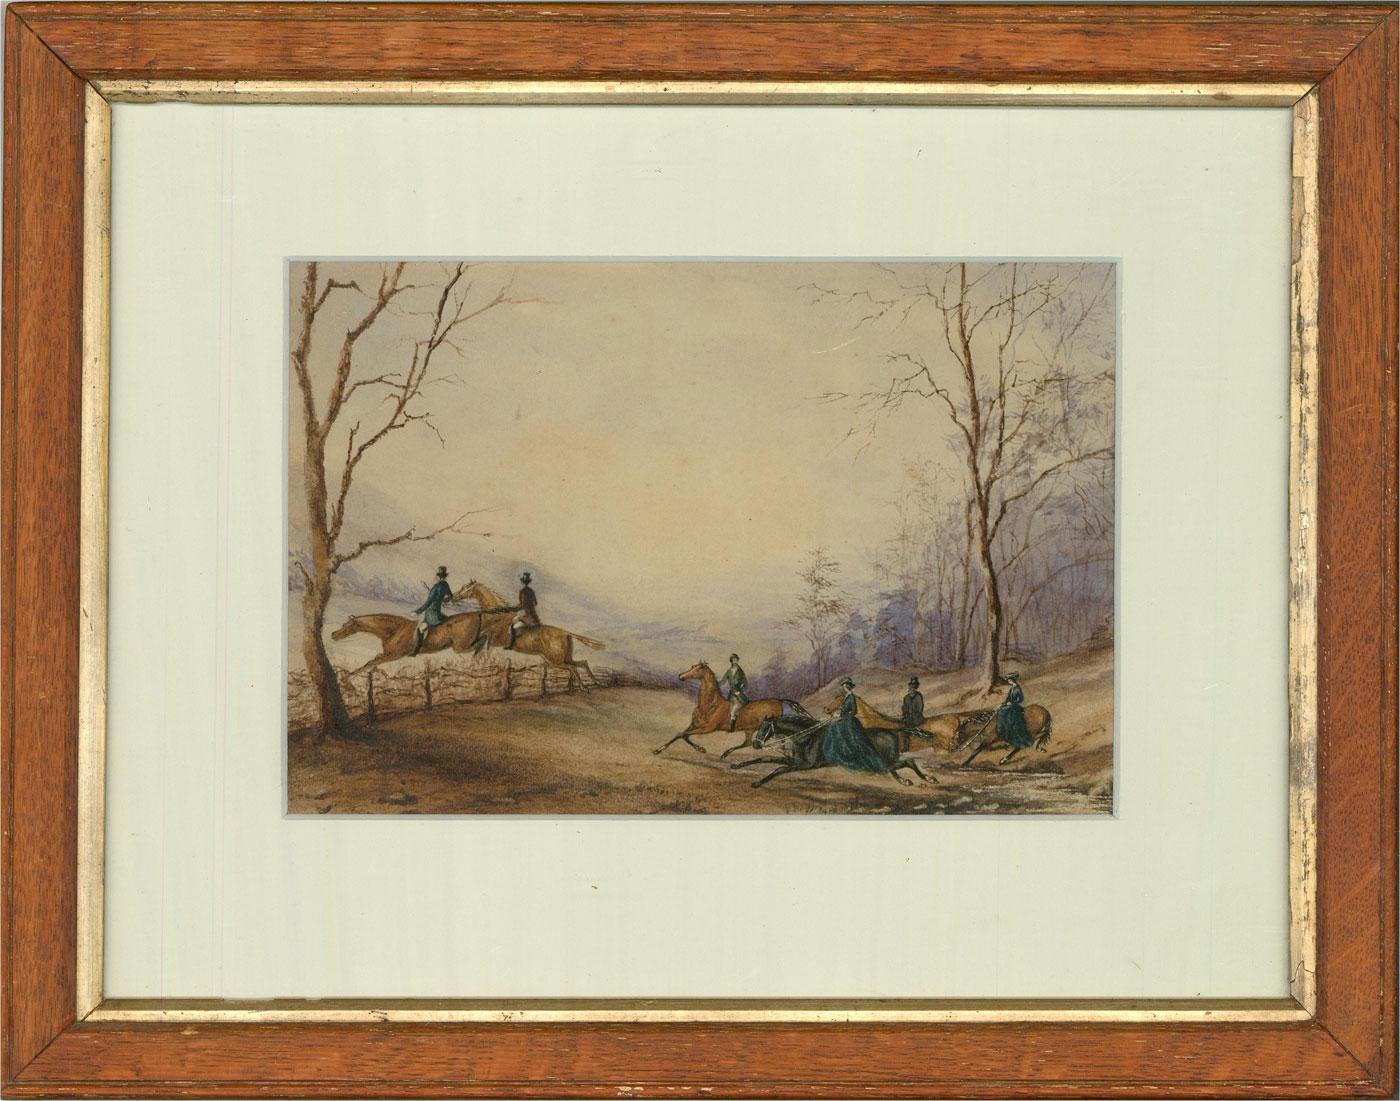 A fine watercolour depicting a hunting party tackling a stream and hedge. The members of the party include Lord and Lady Bolton and Sir Edward Augustus Inglefield, a Royal Navy officer who led one of the searches for the missing Arctic explorer John